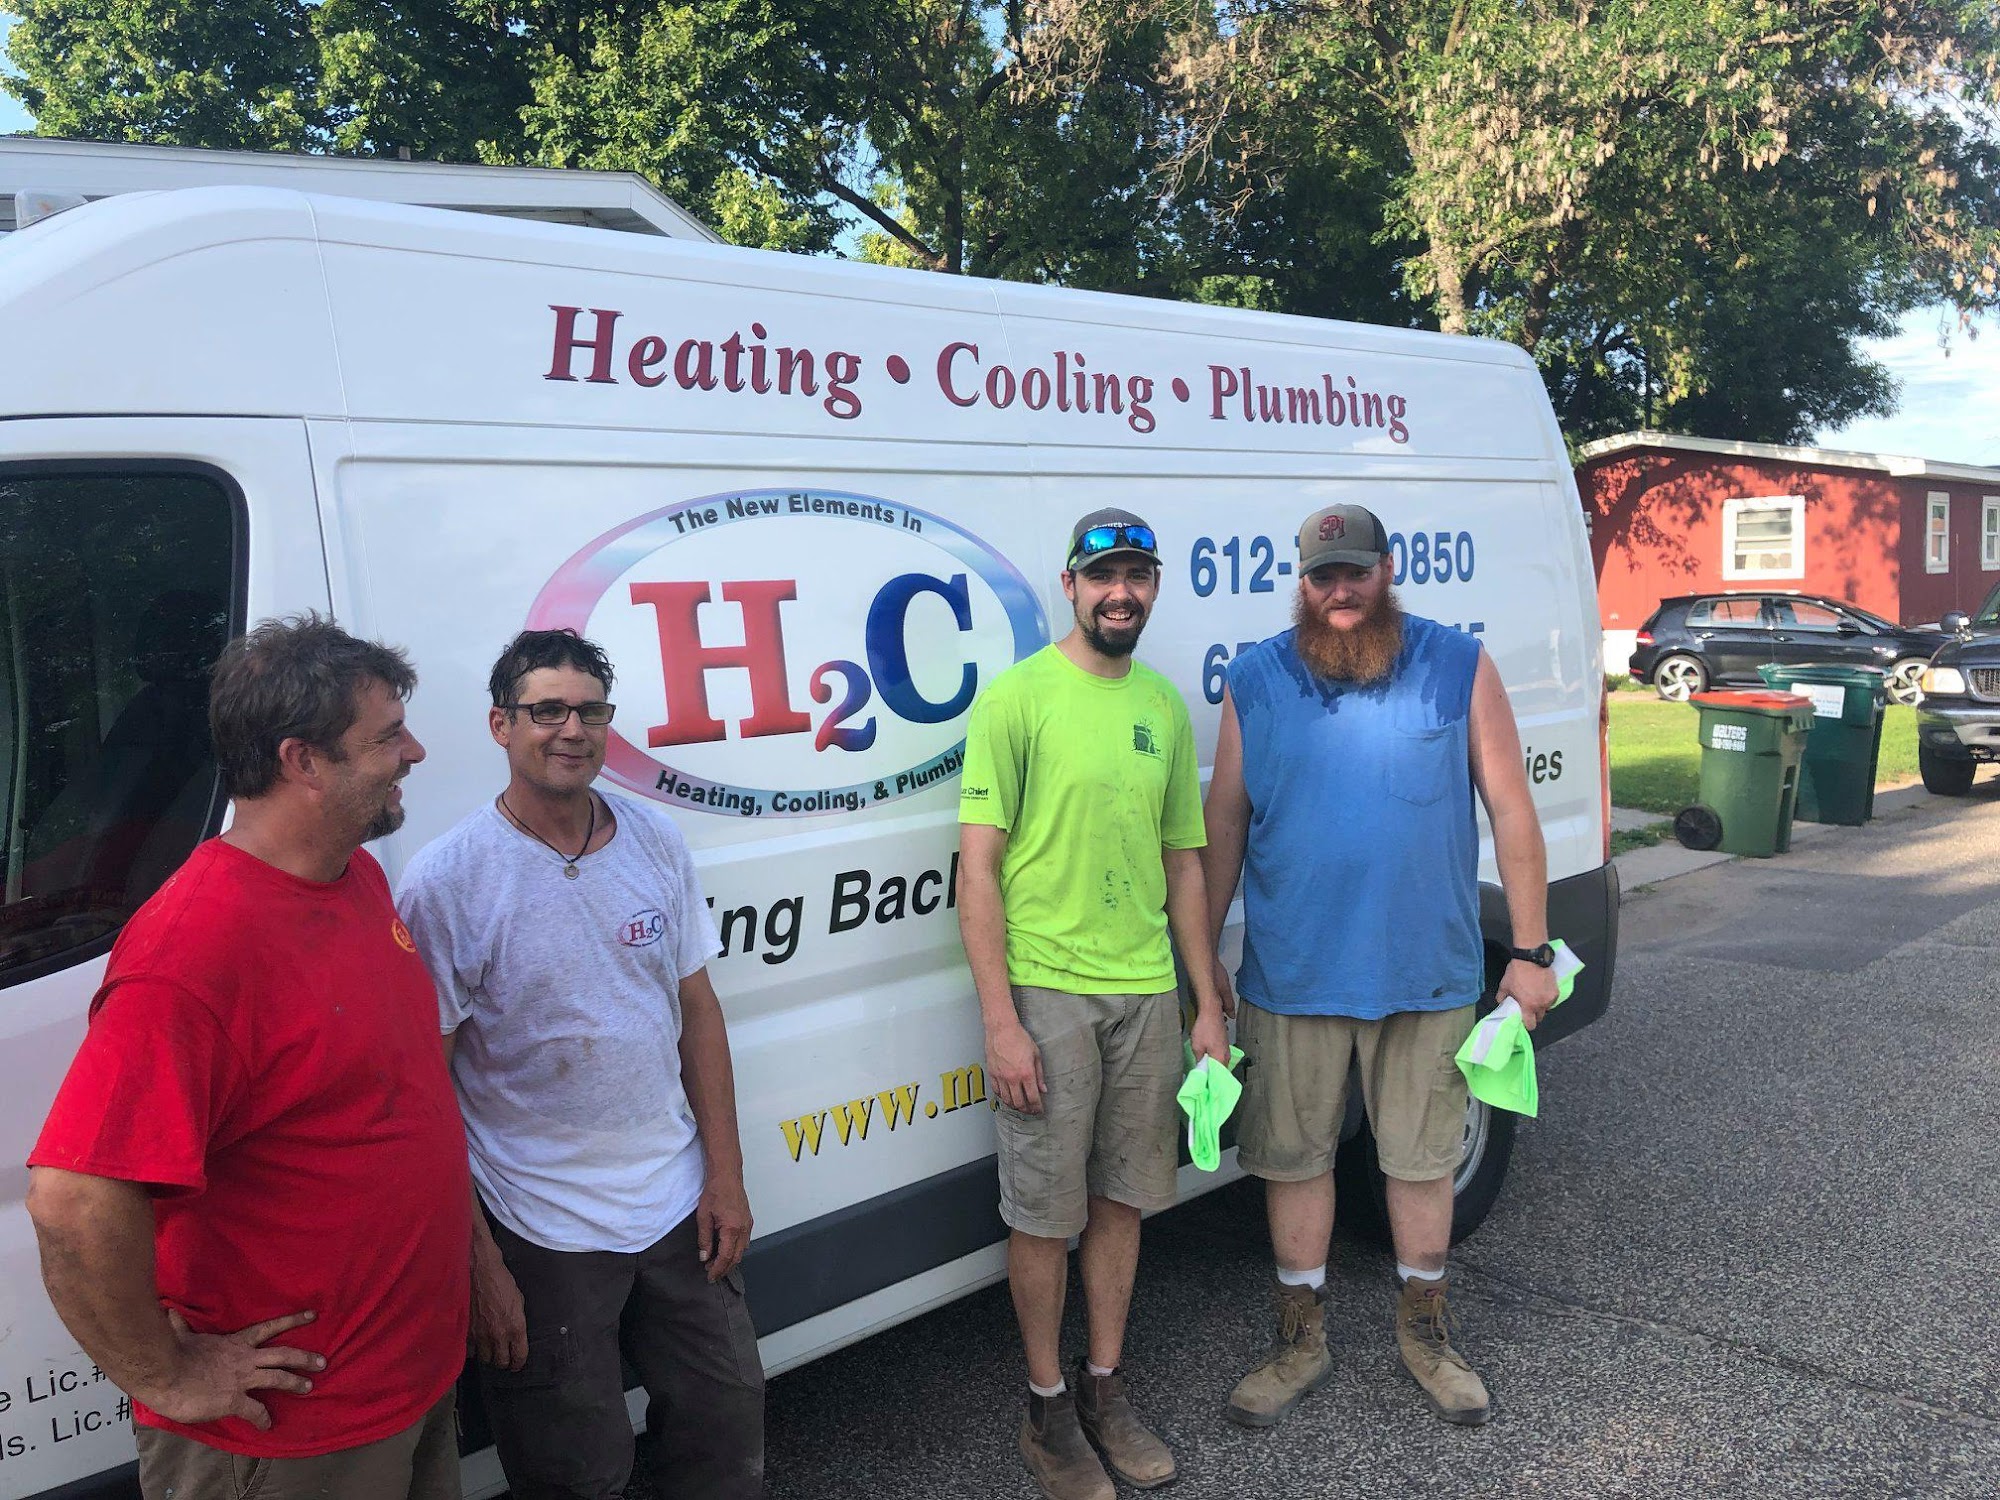 H2C Heating, Cooling and Plumbing 820 Concord St S #105, South St Paul Minnesota 55075